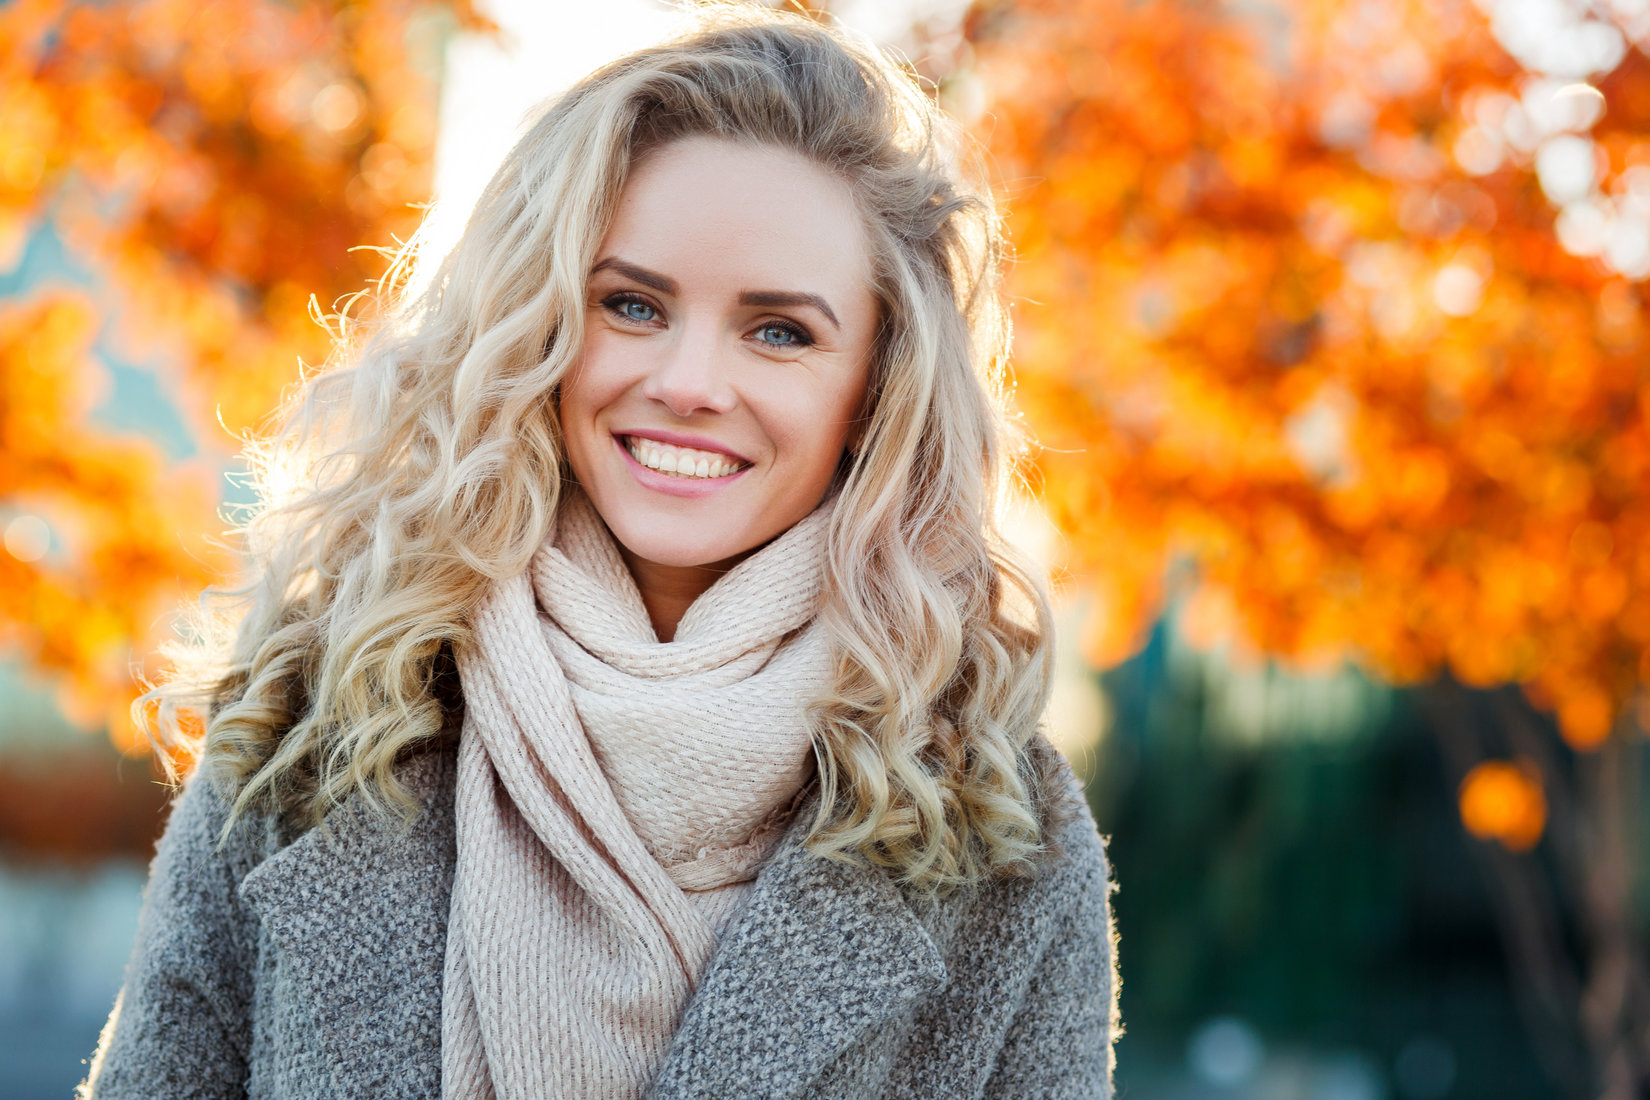 Beautiful Smiling Blond Woman With Curly Hair And Blue Eyes Ok